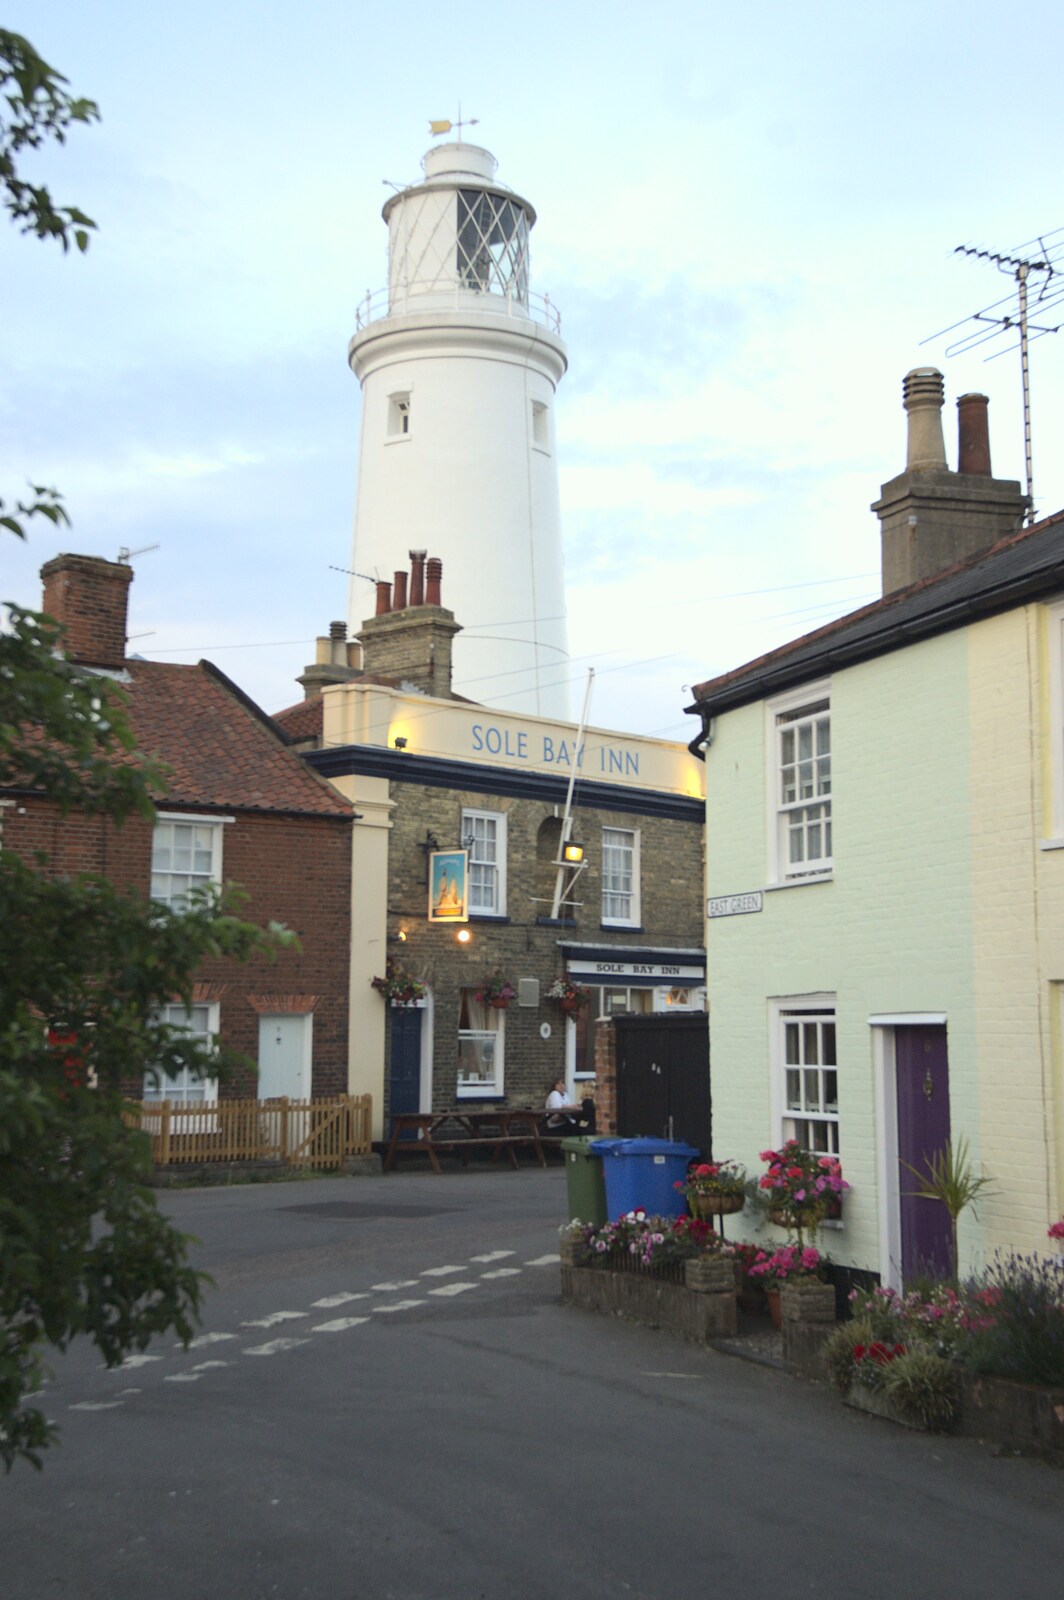 The lighthouse and Sole Bay Inn from A "Minimoon" and an Adnams Brewery Trip, Southwold, Suffolk - 7th July 2010